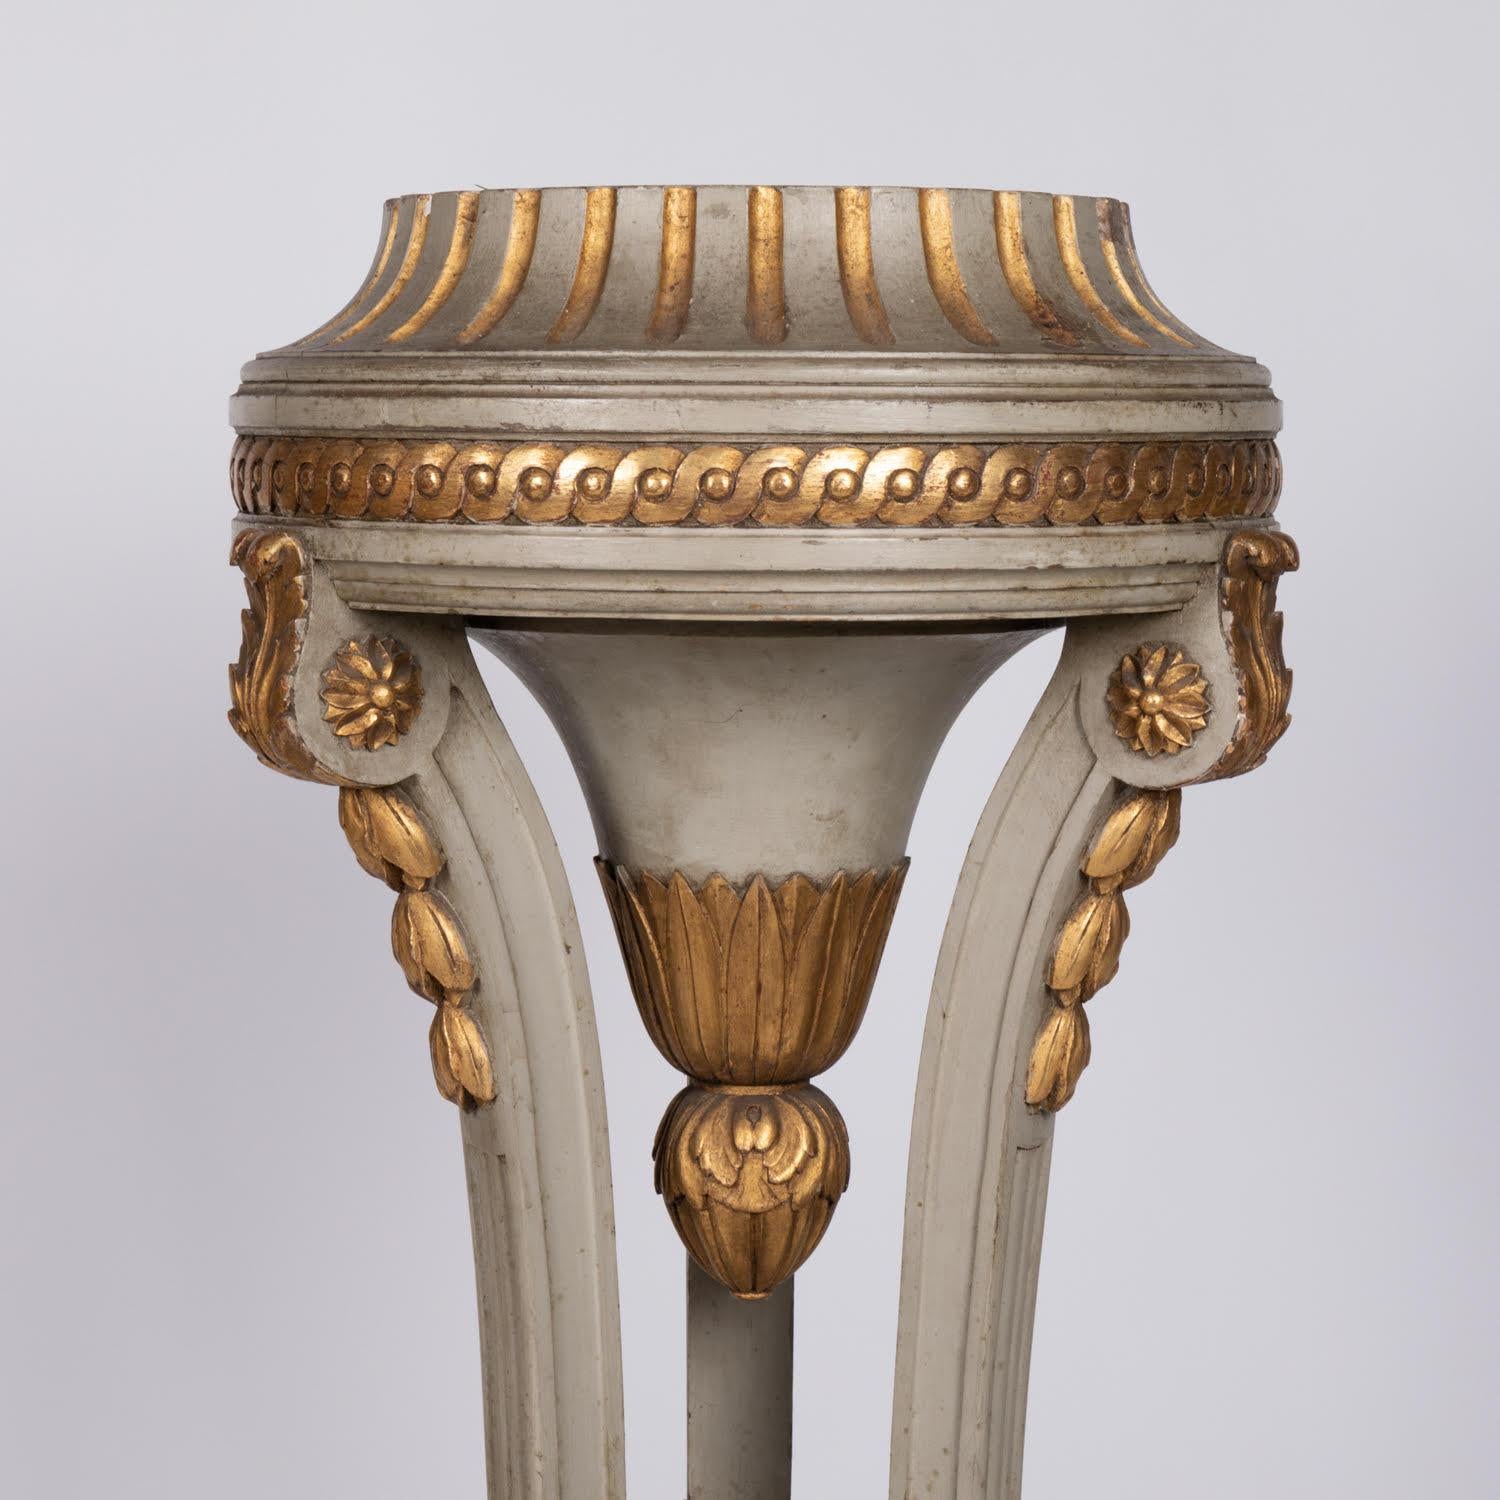 Stele, Selette in carved and gilded wood, 19th century.

Carved and gilded wood column in the Louis XVI style, 19th century.  

H: 110cm , D: 41cm, D: 35cm